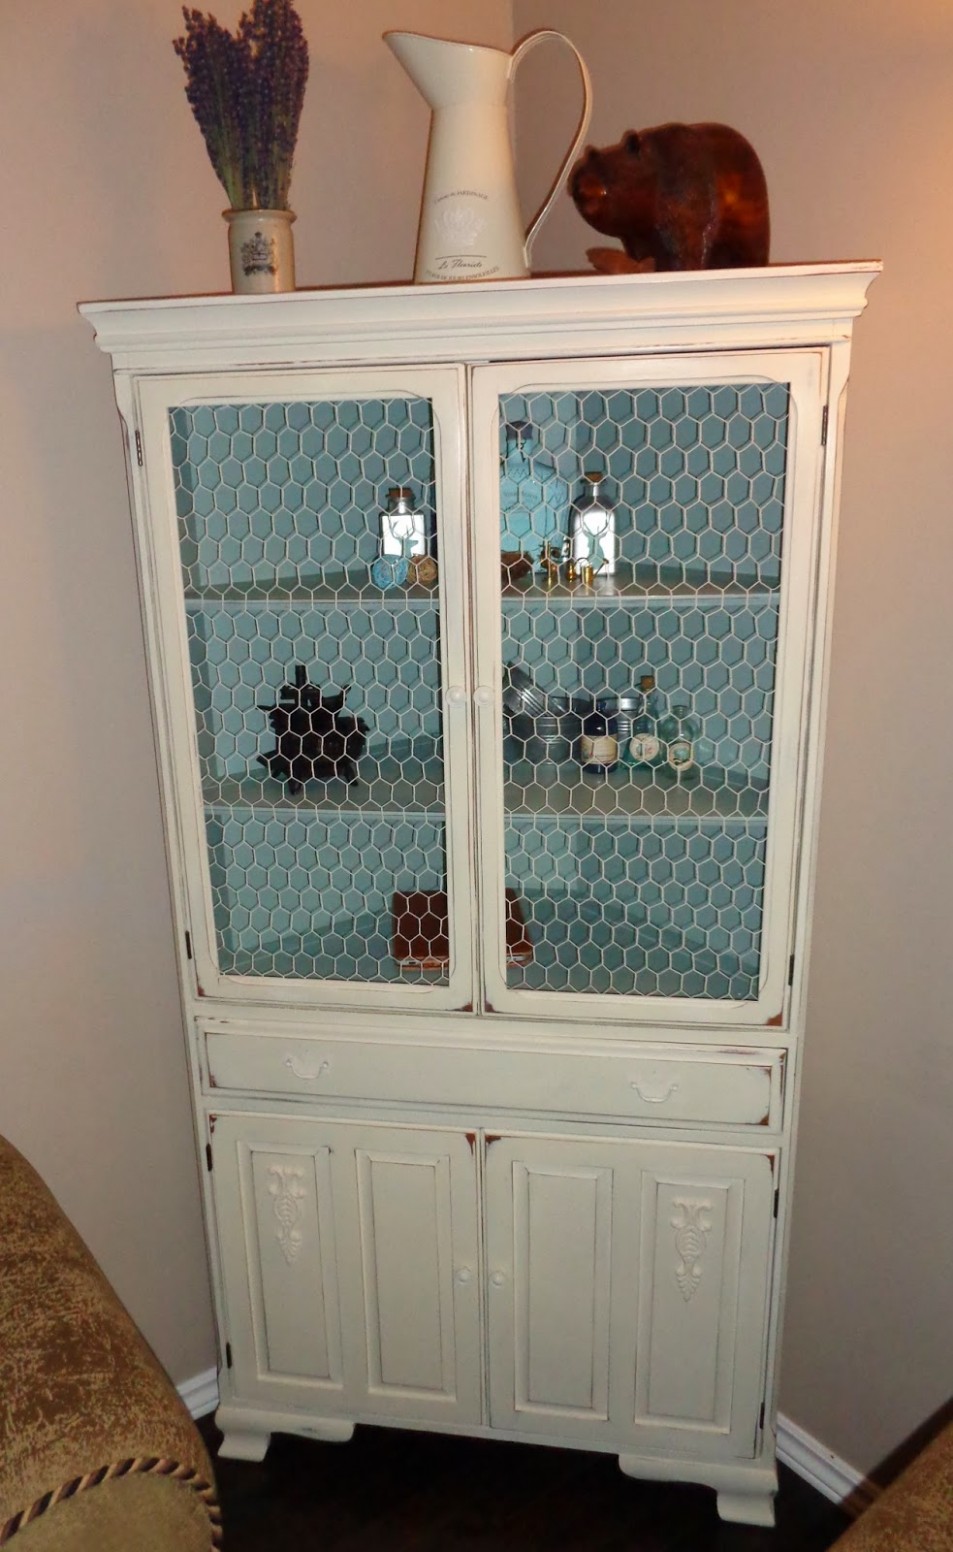 Redoem: Old China Cabinet Becomes Shabby Beauty Where To Buy Annie Sloan Chalk Paint In Edmonton